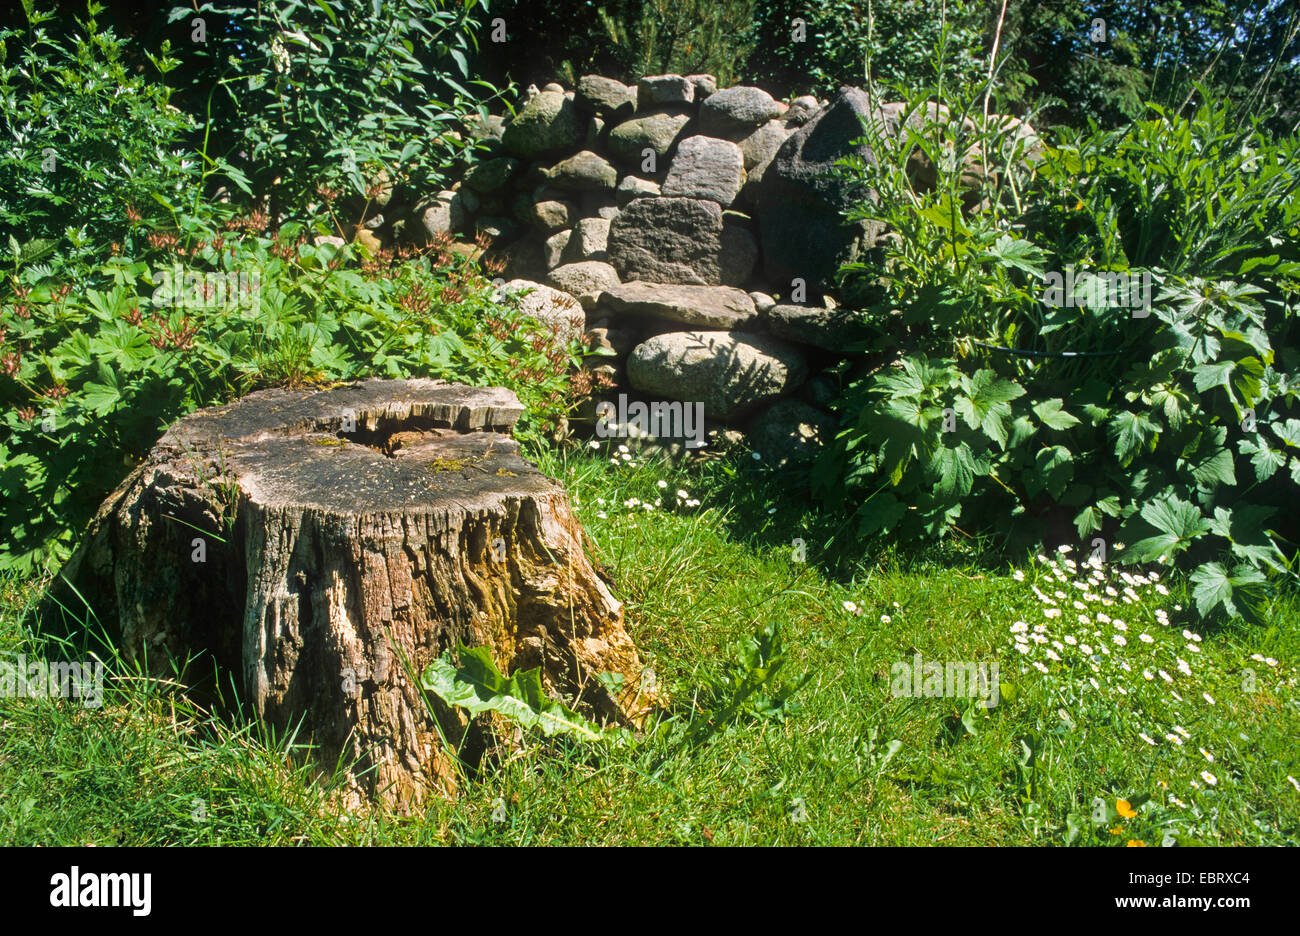 Natural garden with stump and heap of stones, stone cairn, Germany Stock Photo